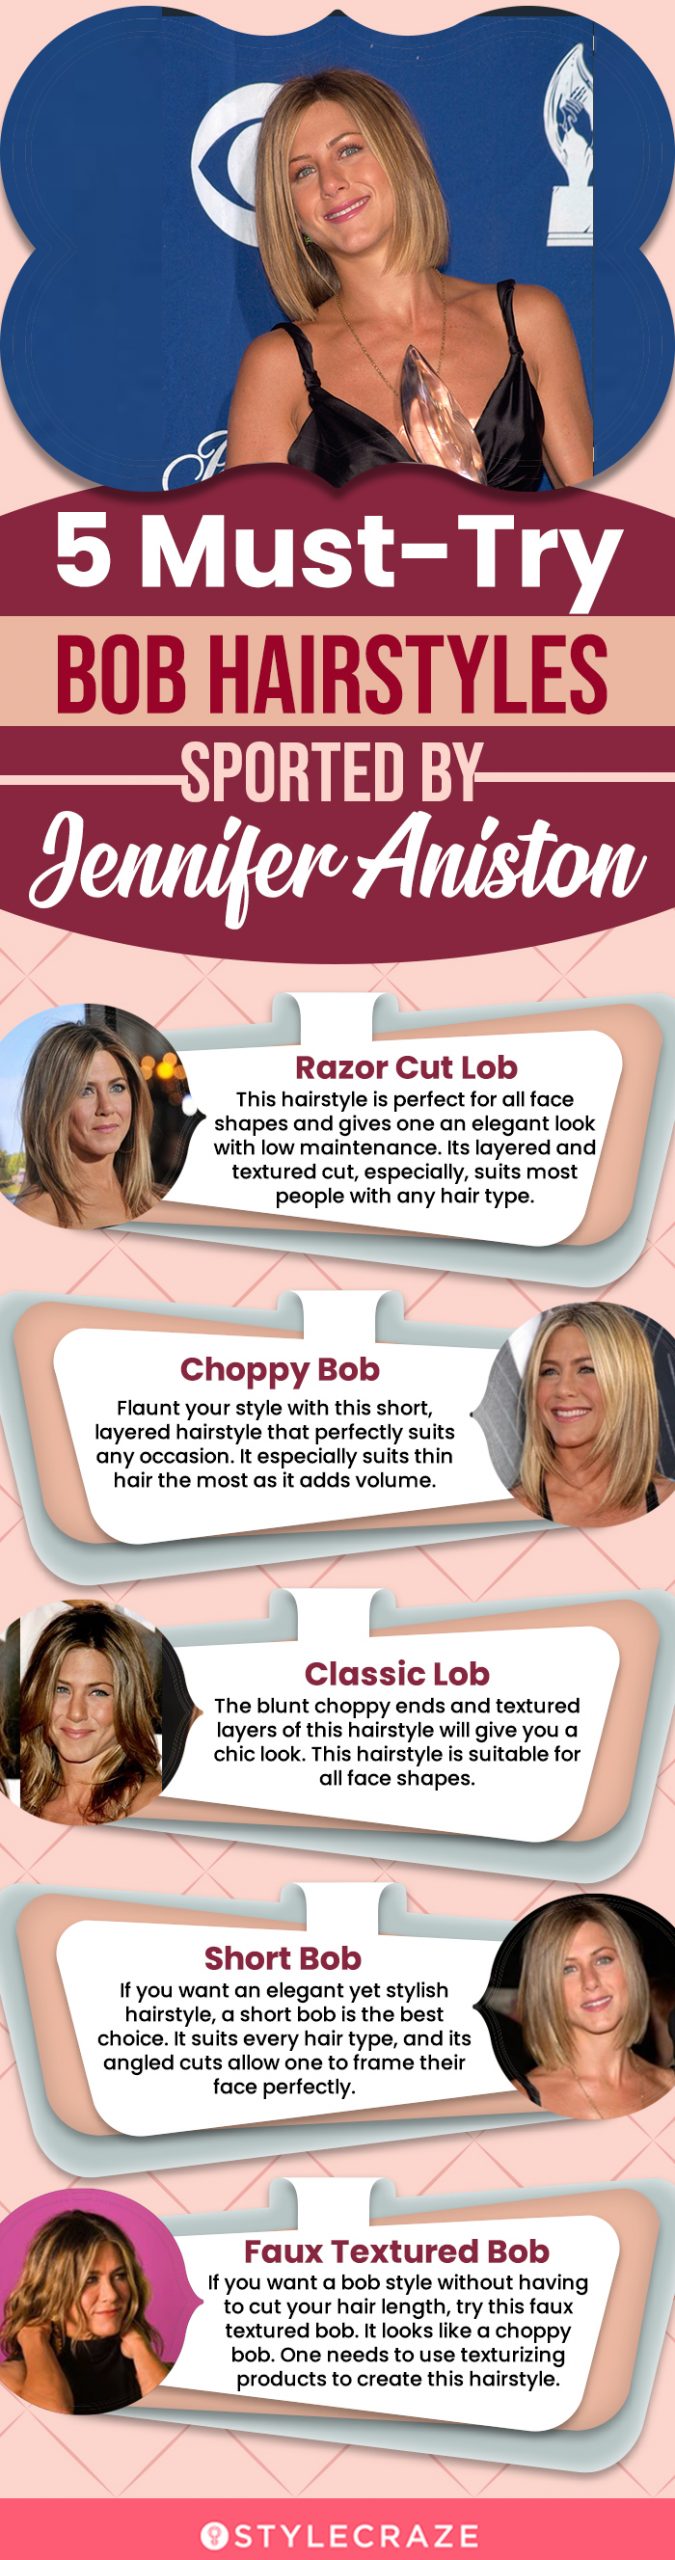 must try bob hairstyles of jennifer aniston (infographic)